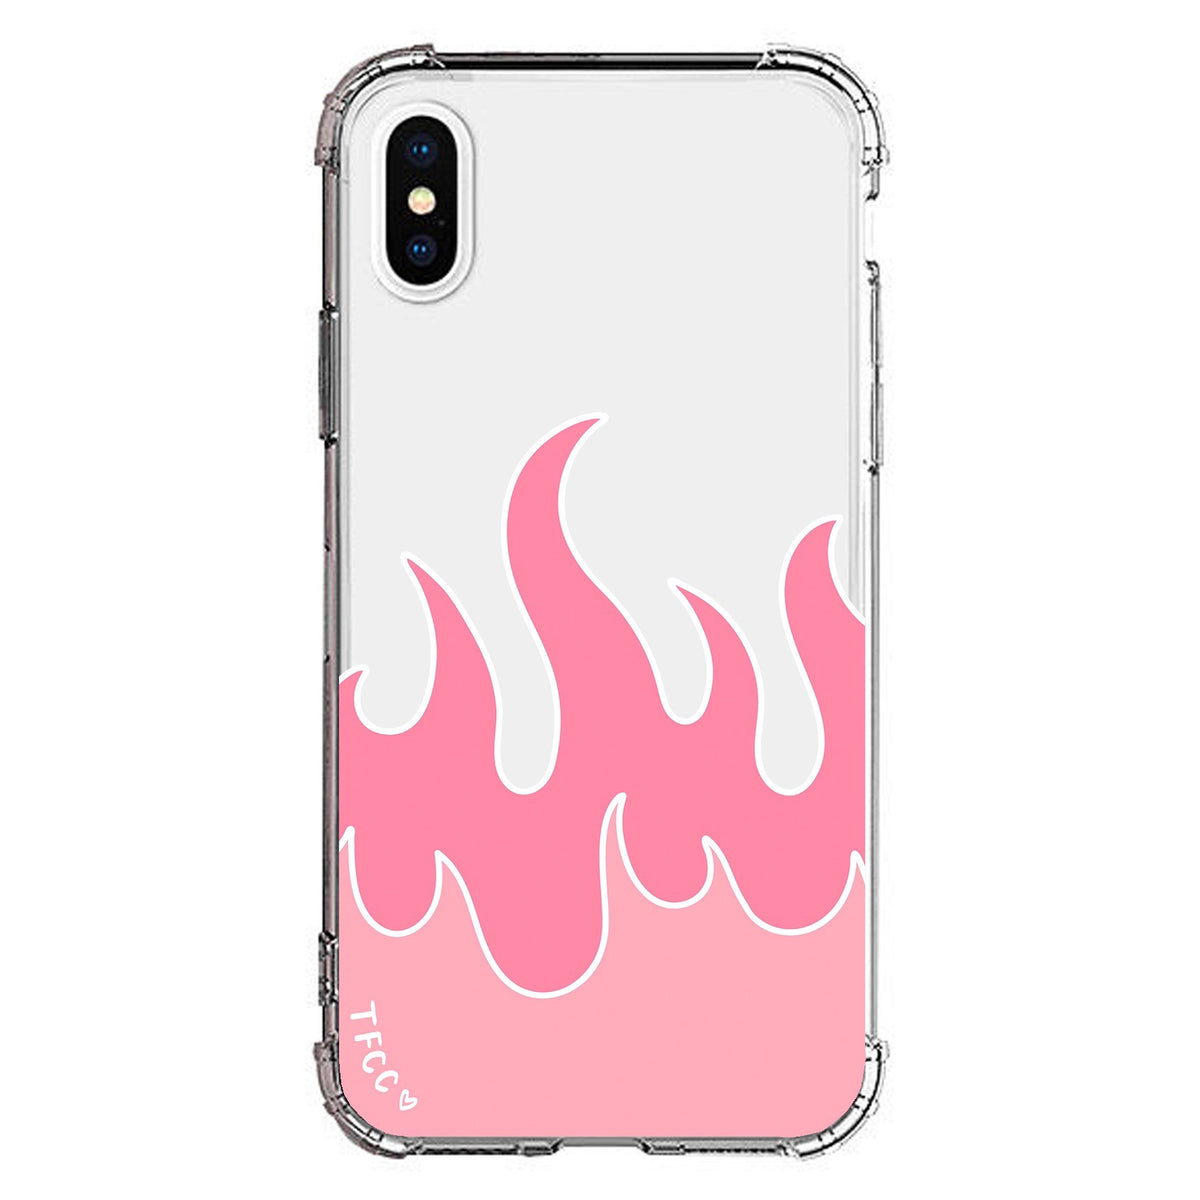 FLAMES CLEAR CASE - thefonecasecompany